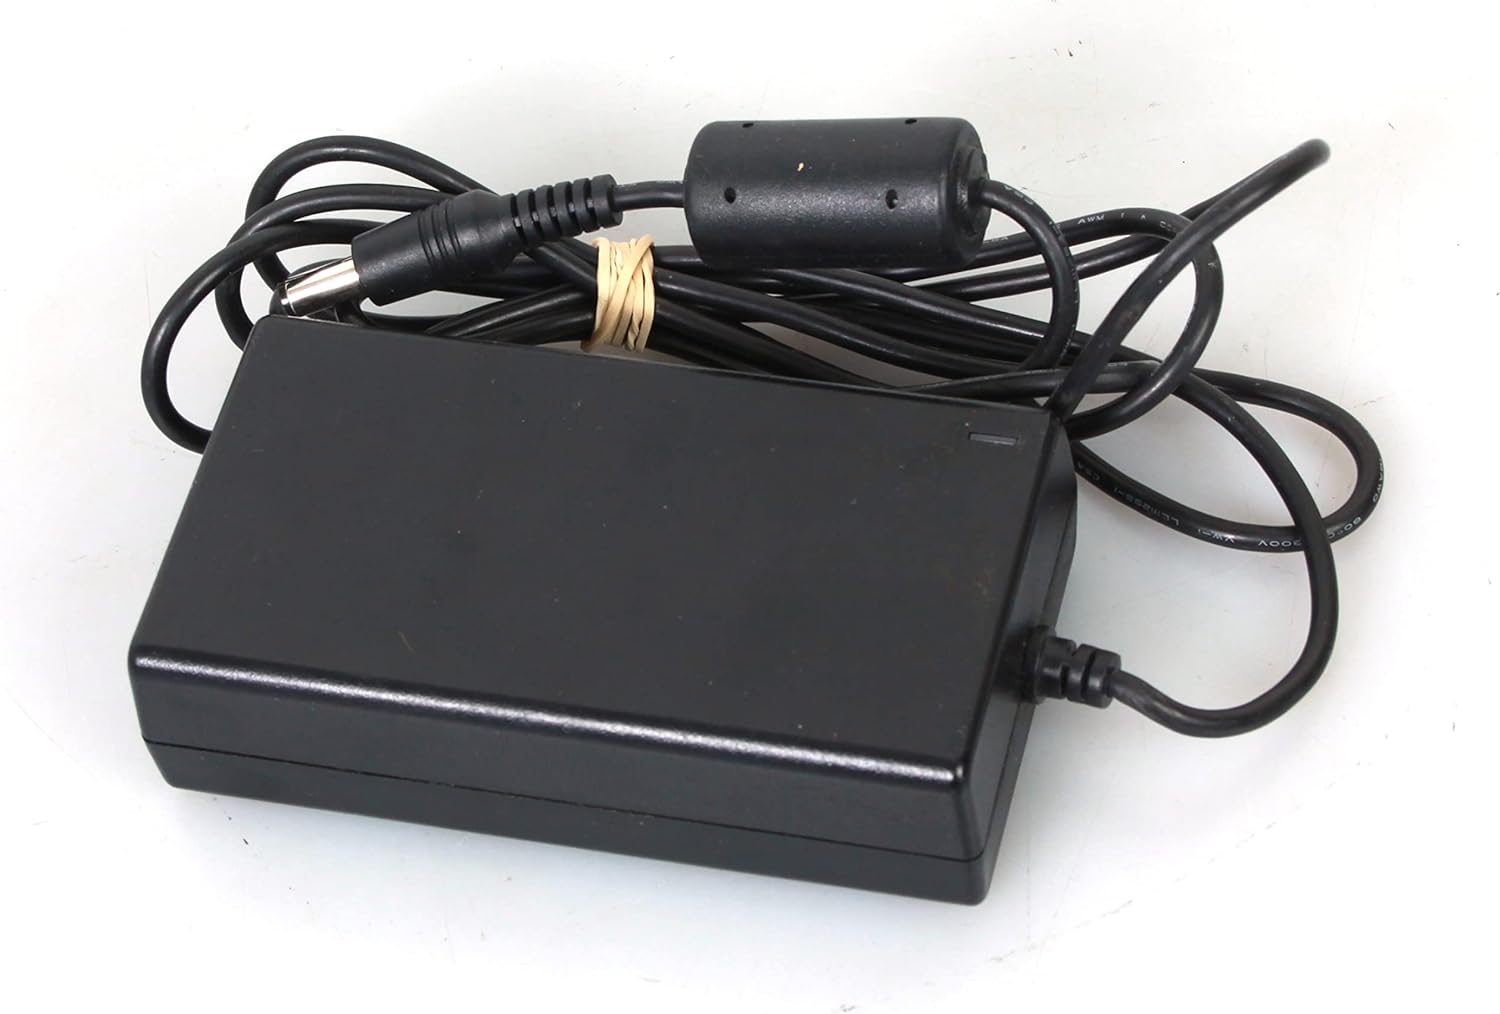 API-7629 AC DC Power Supply Adapter Charger Output 19V 3.16A